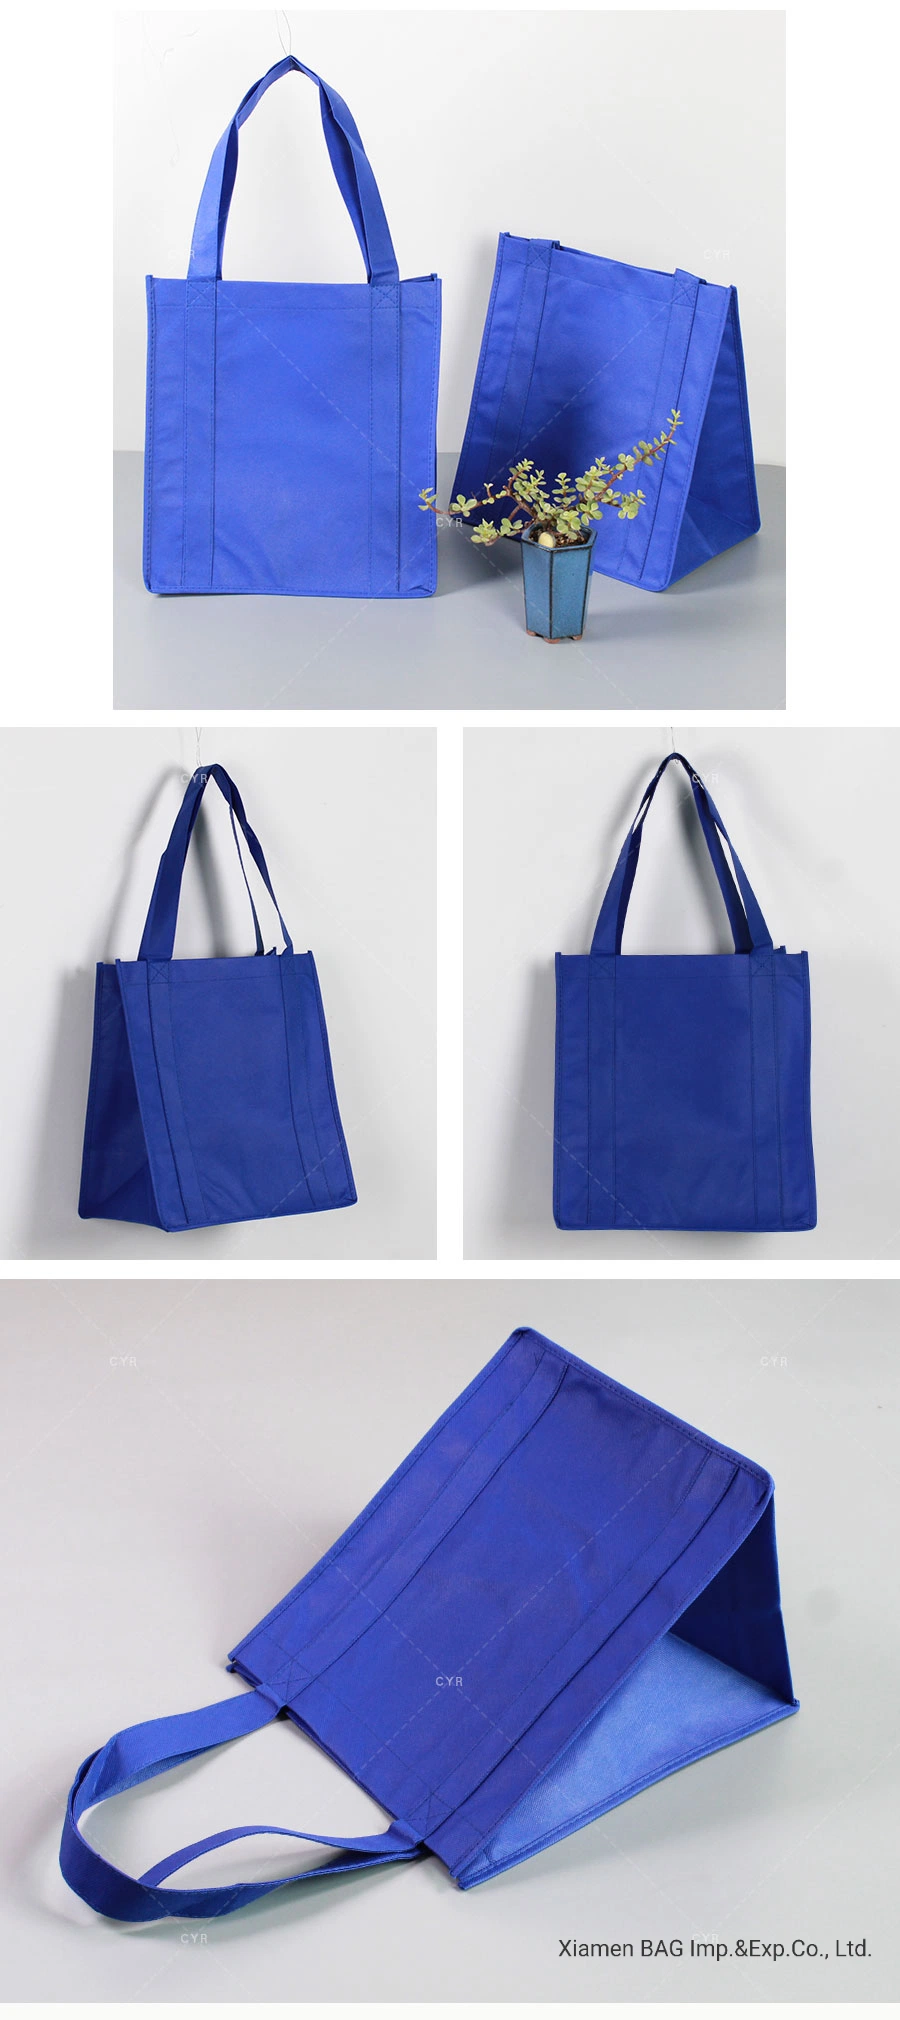 PP Non Woven Fabric Shopping Bag Promotional Custom Reusable Carry Bag Eco-Friendly Customized Tote Bag Grocery Bag